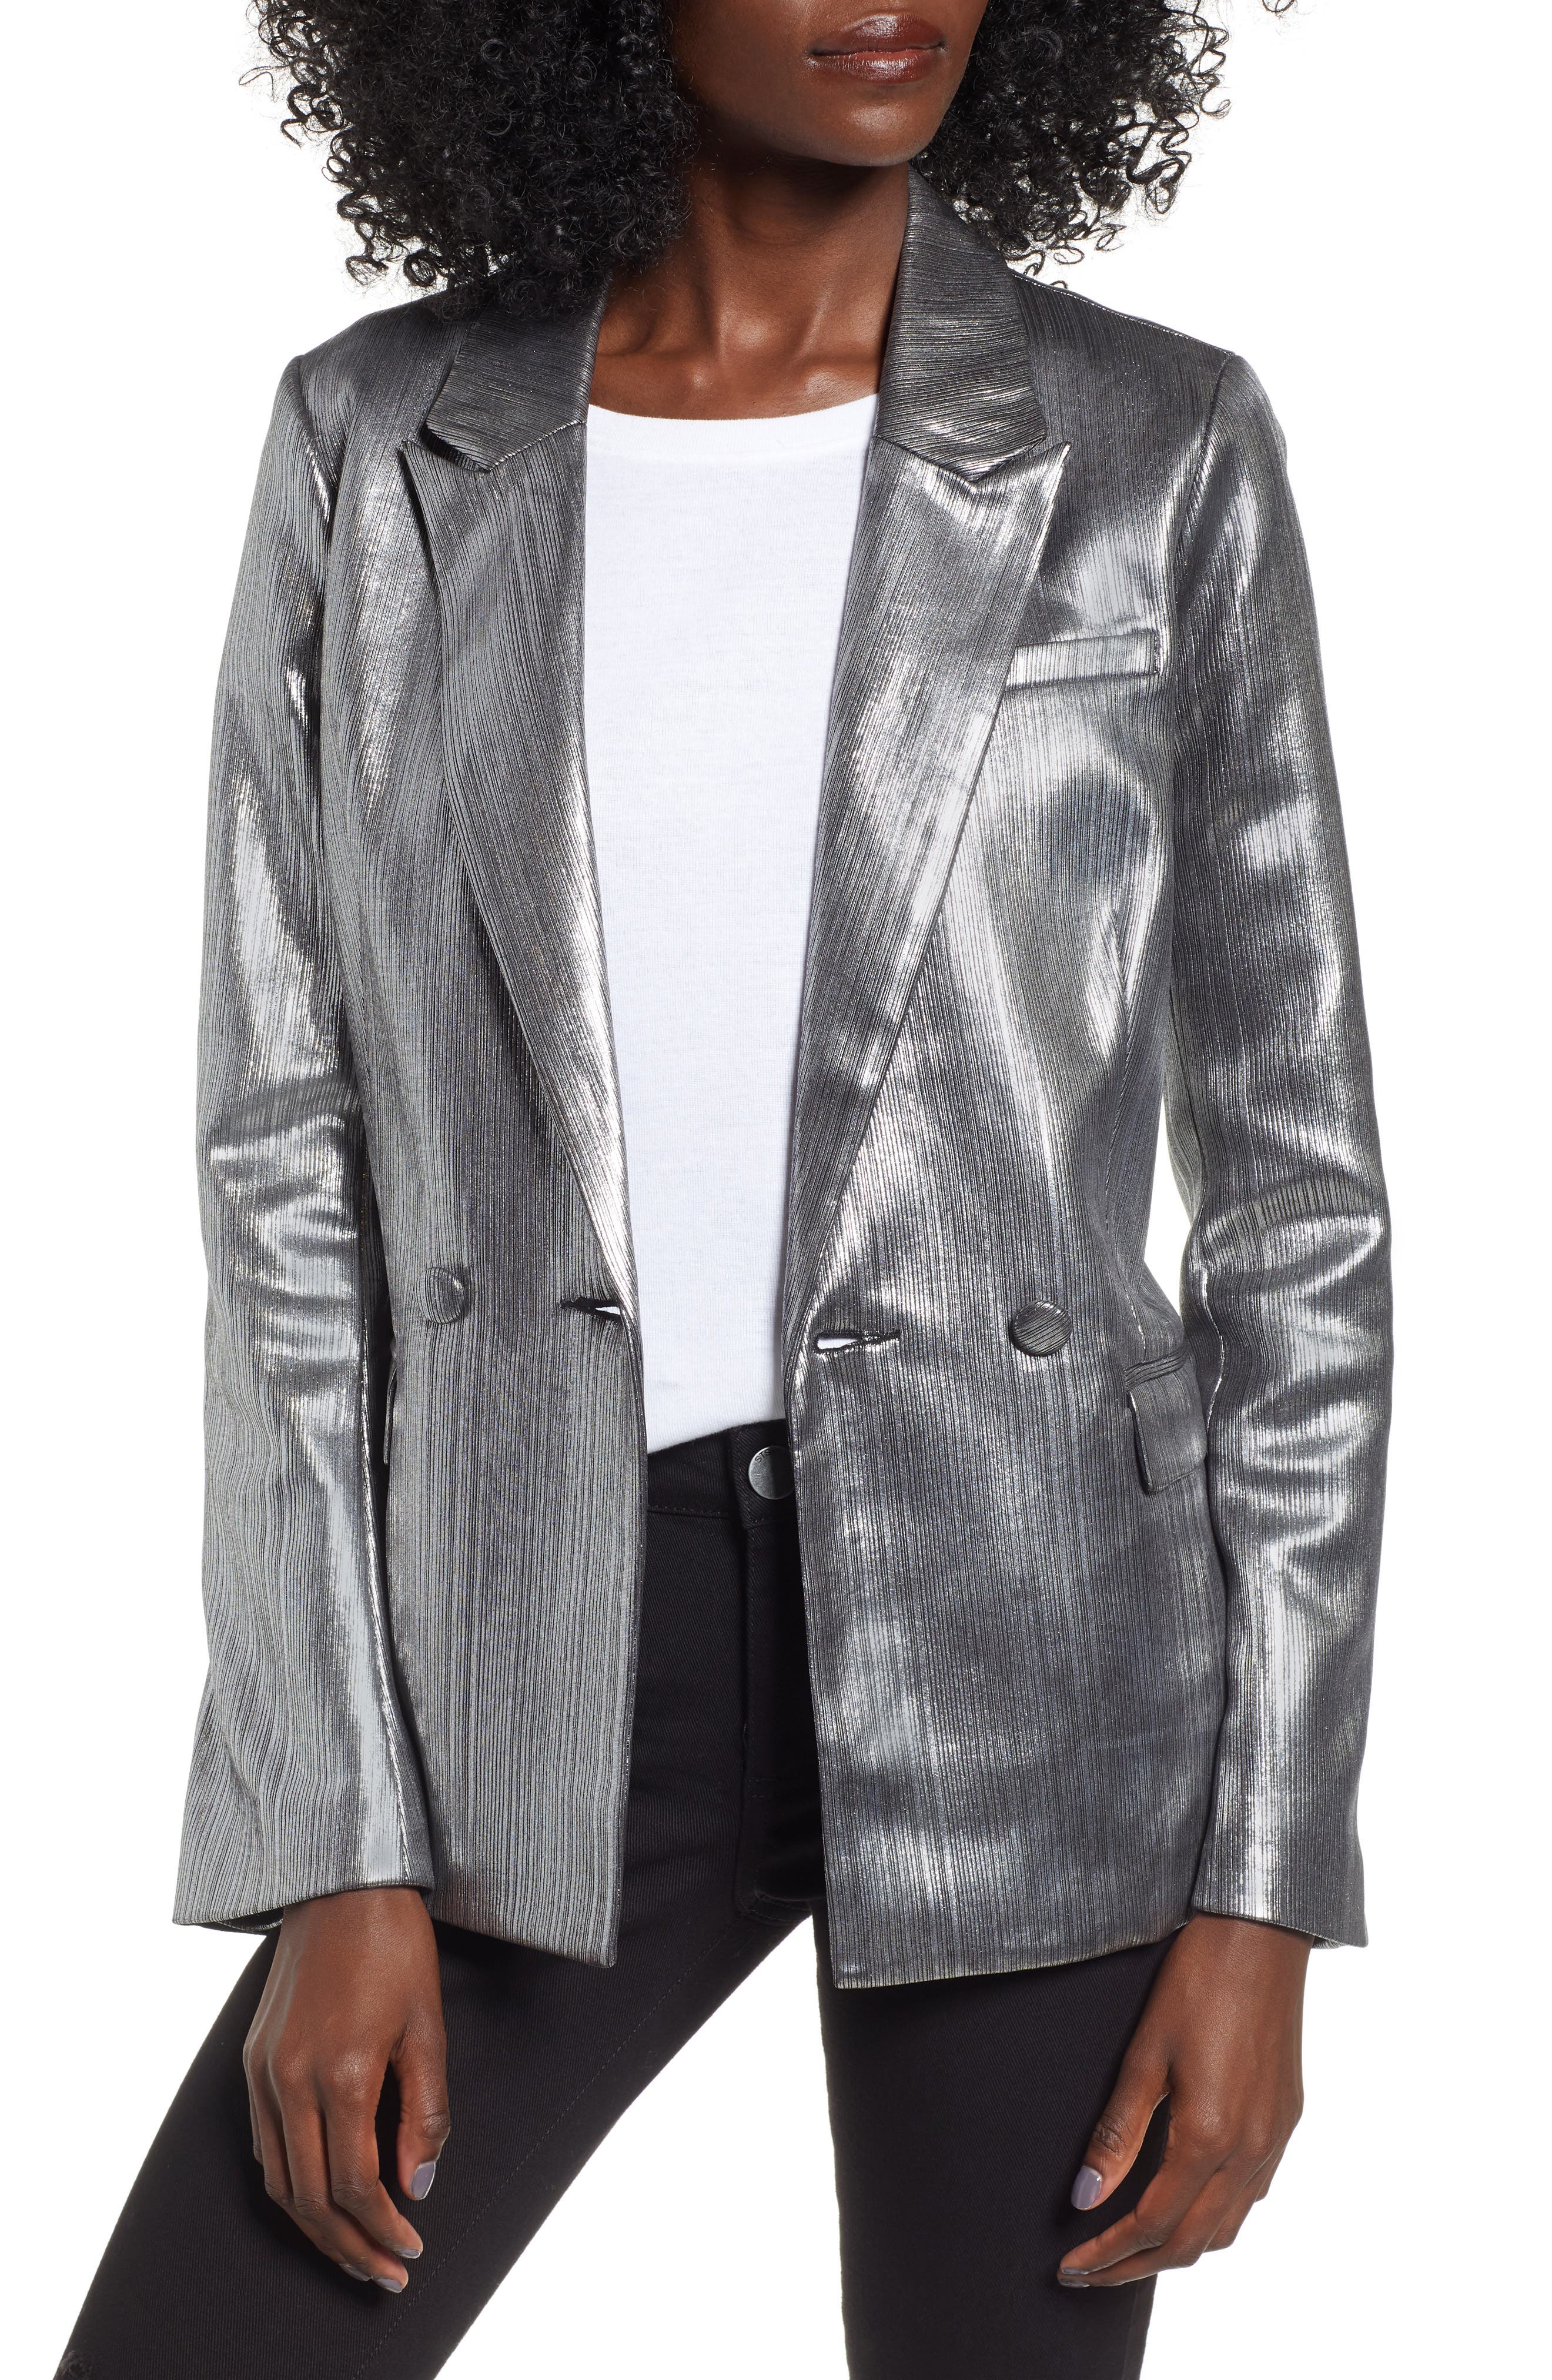 It's not just Beyoncé – anyone can look good in silver trousers